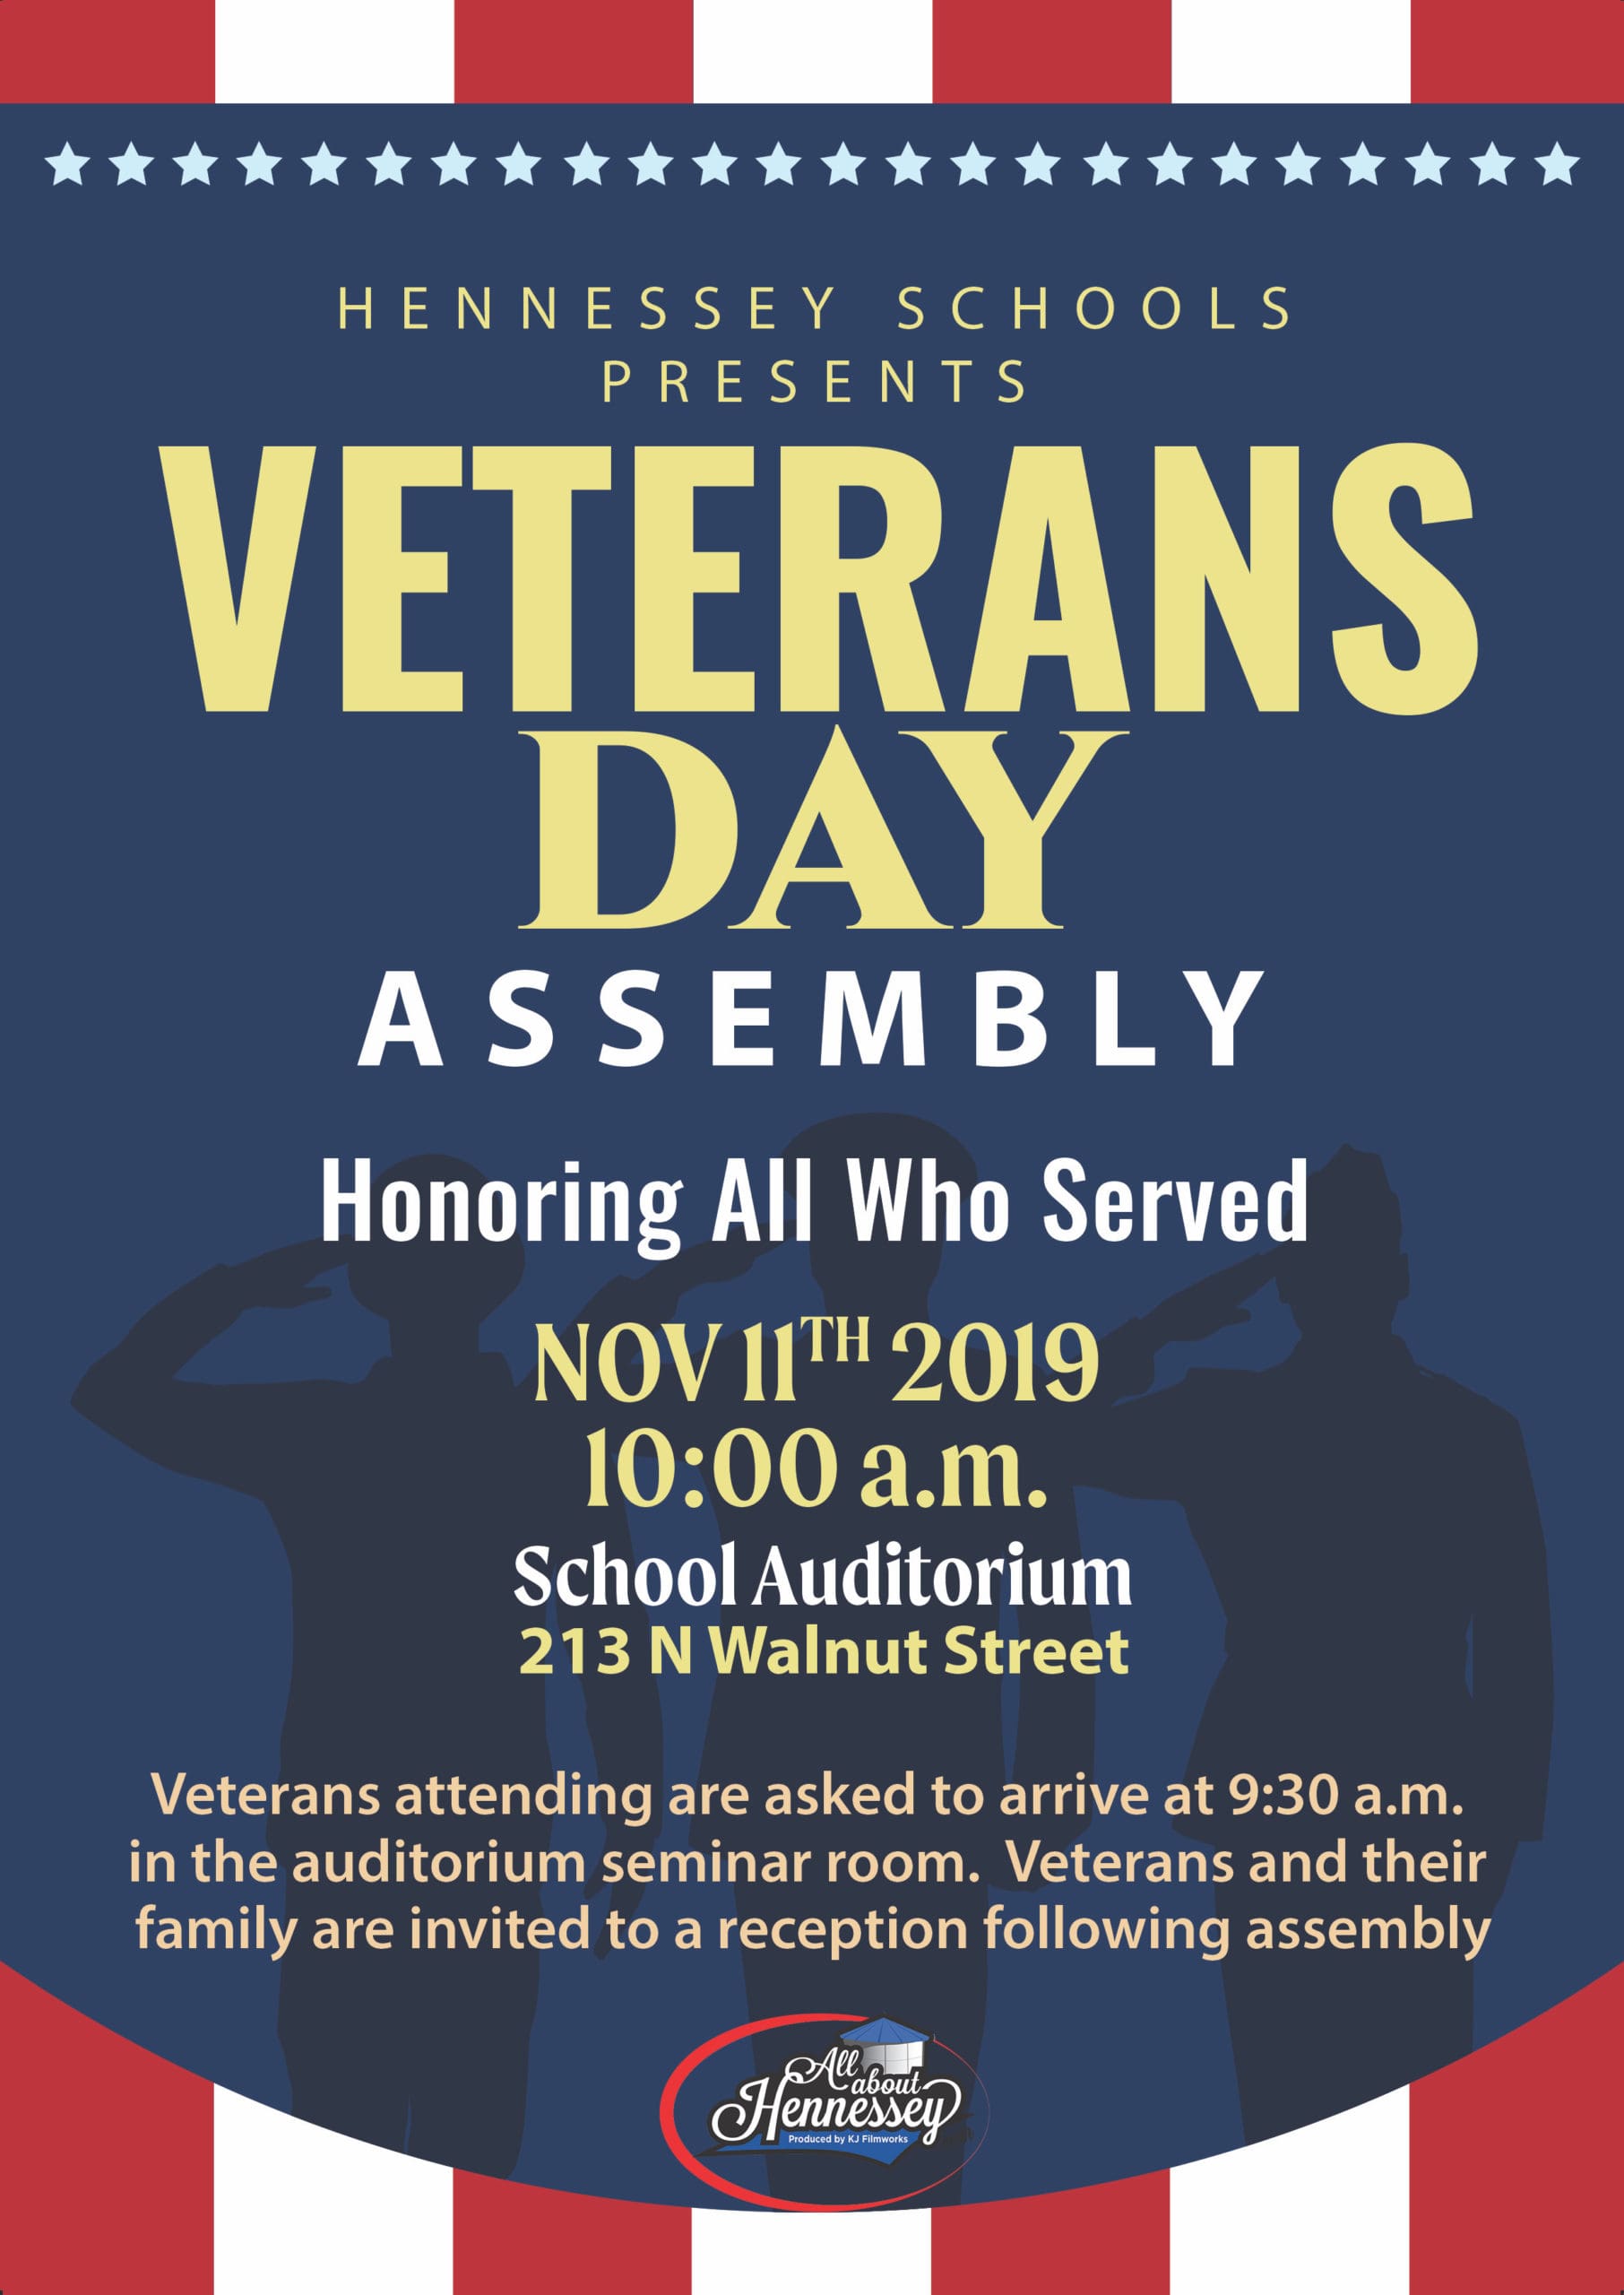 ALL VETERANS AND THEIR FAMILY ARE INVITED TO ATTEND